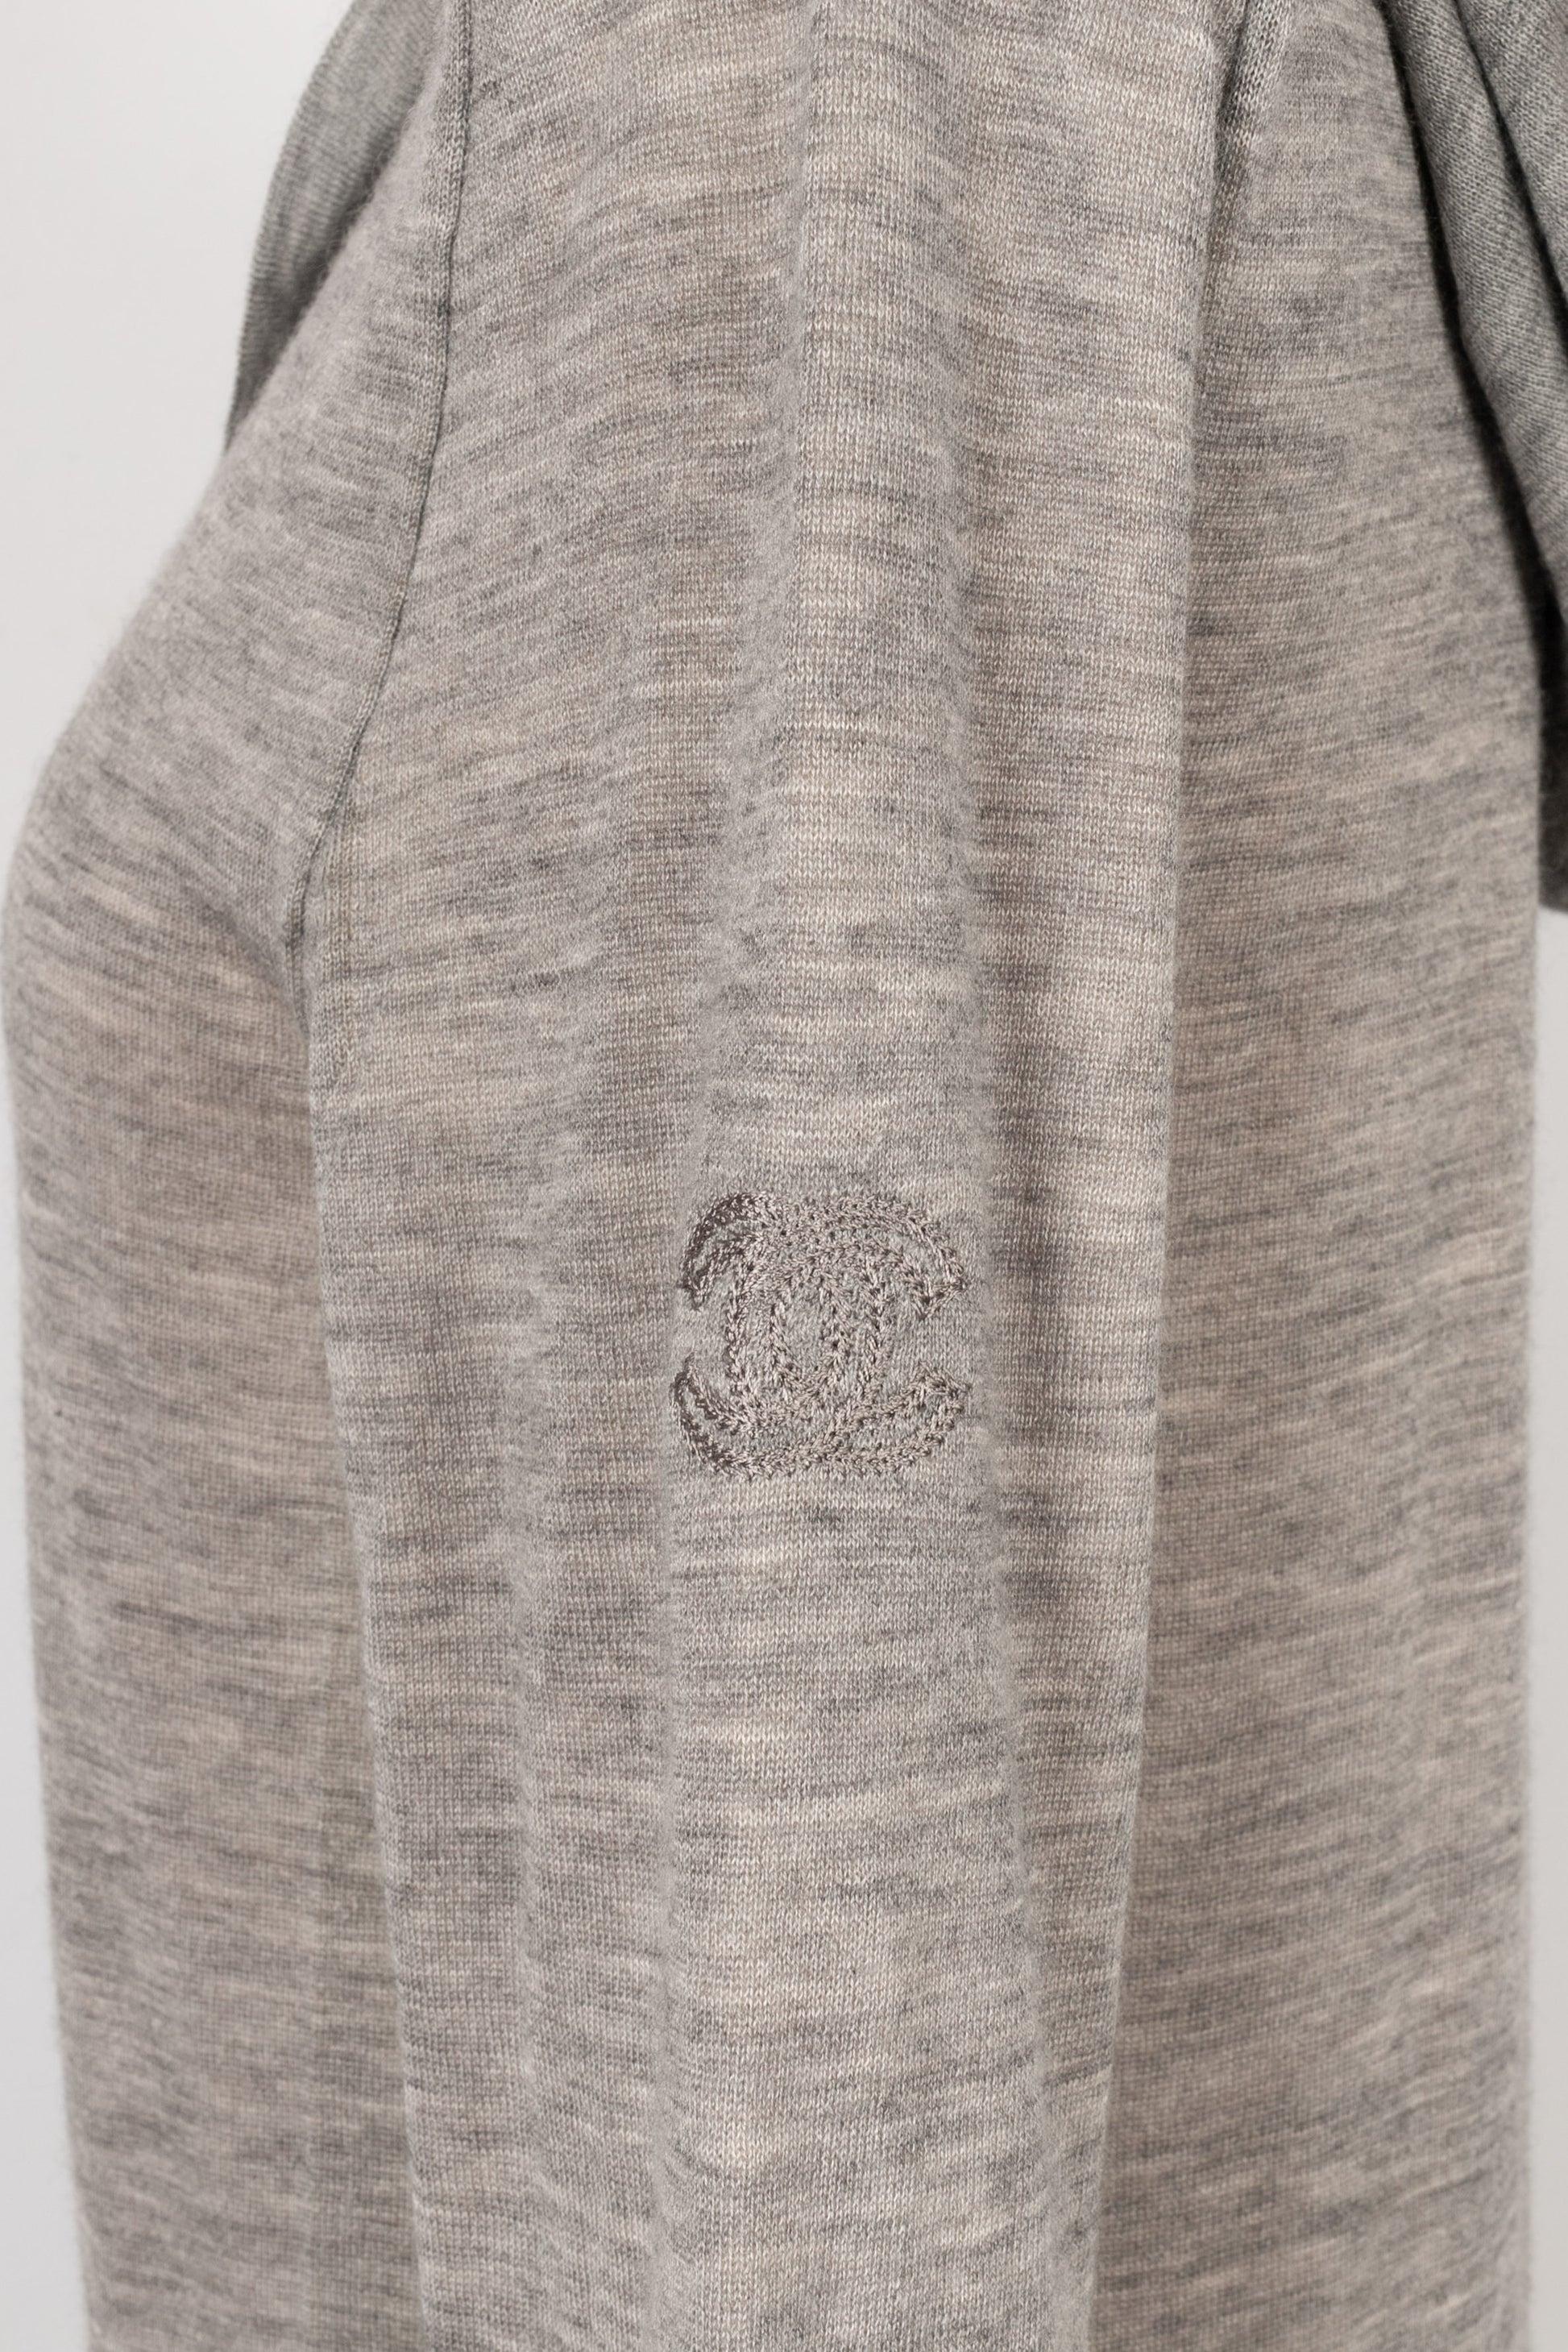 Chanel Grey Cashmere Hooded Pullover Dress For Sale 2